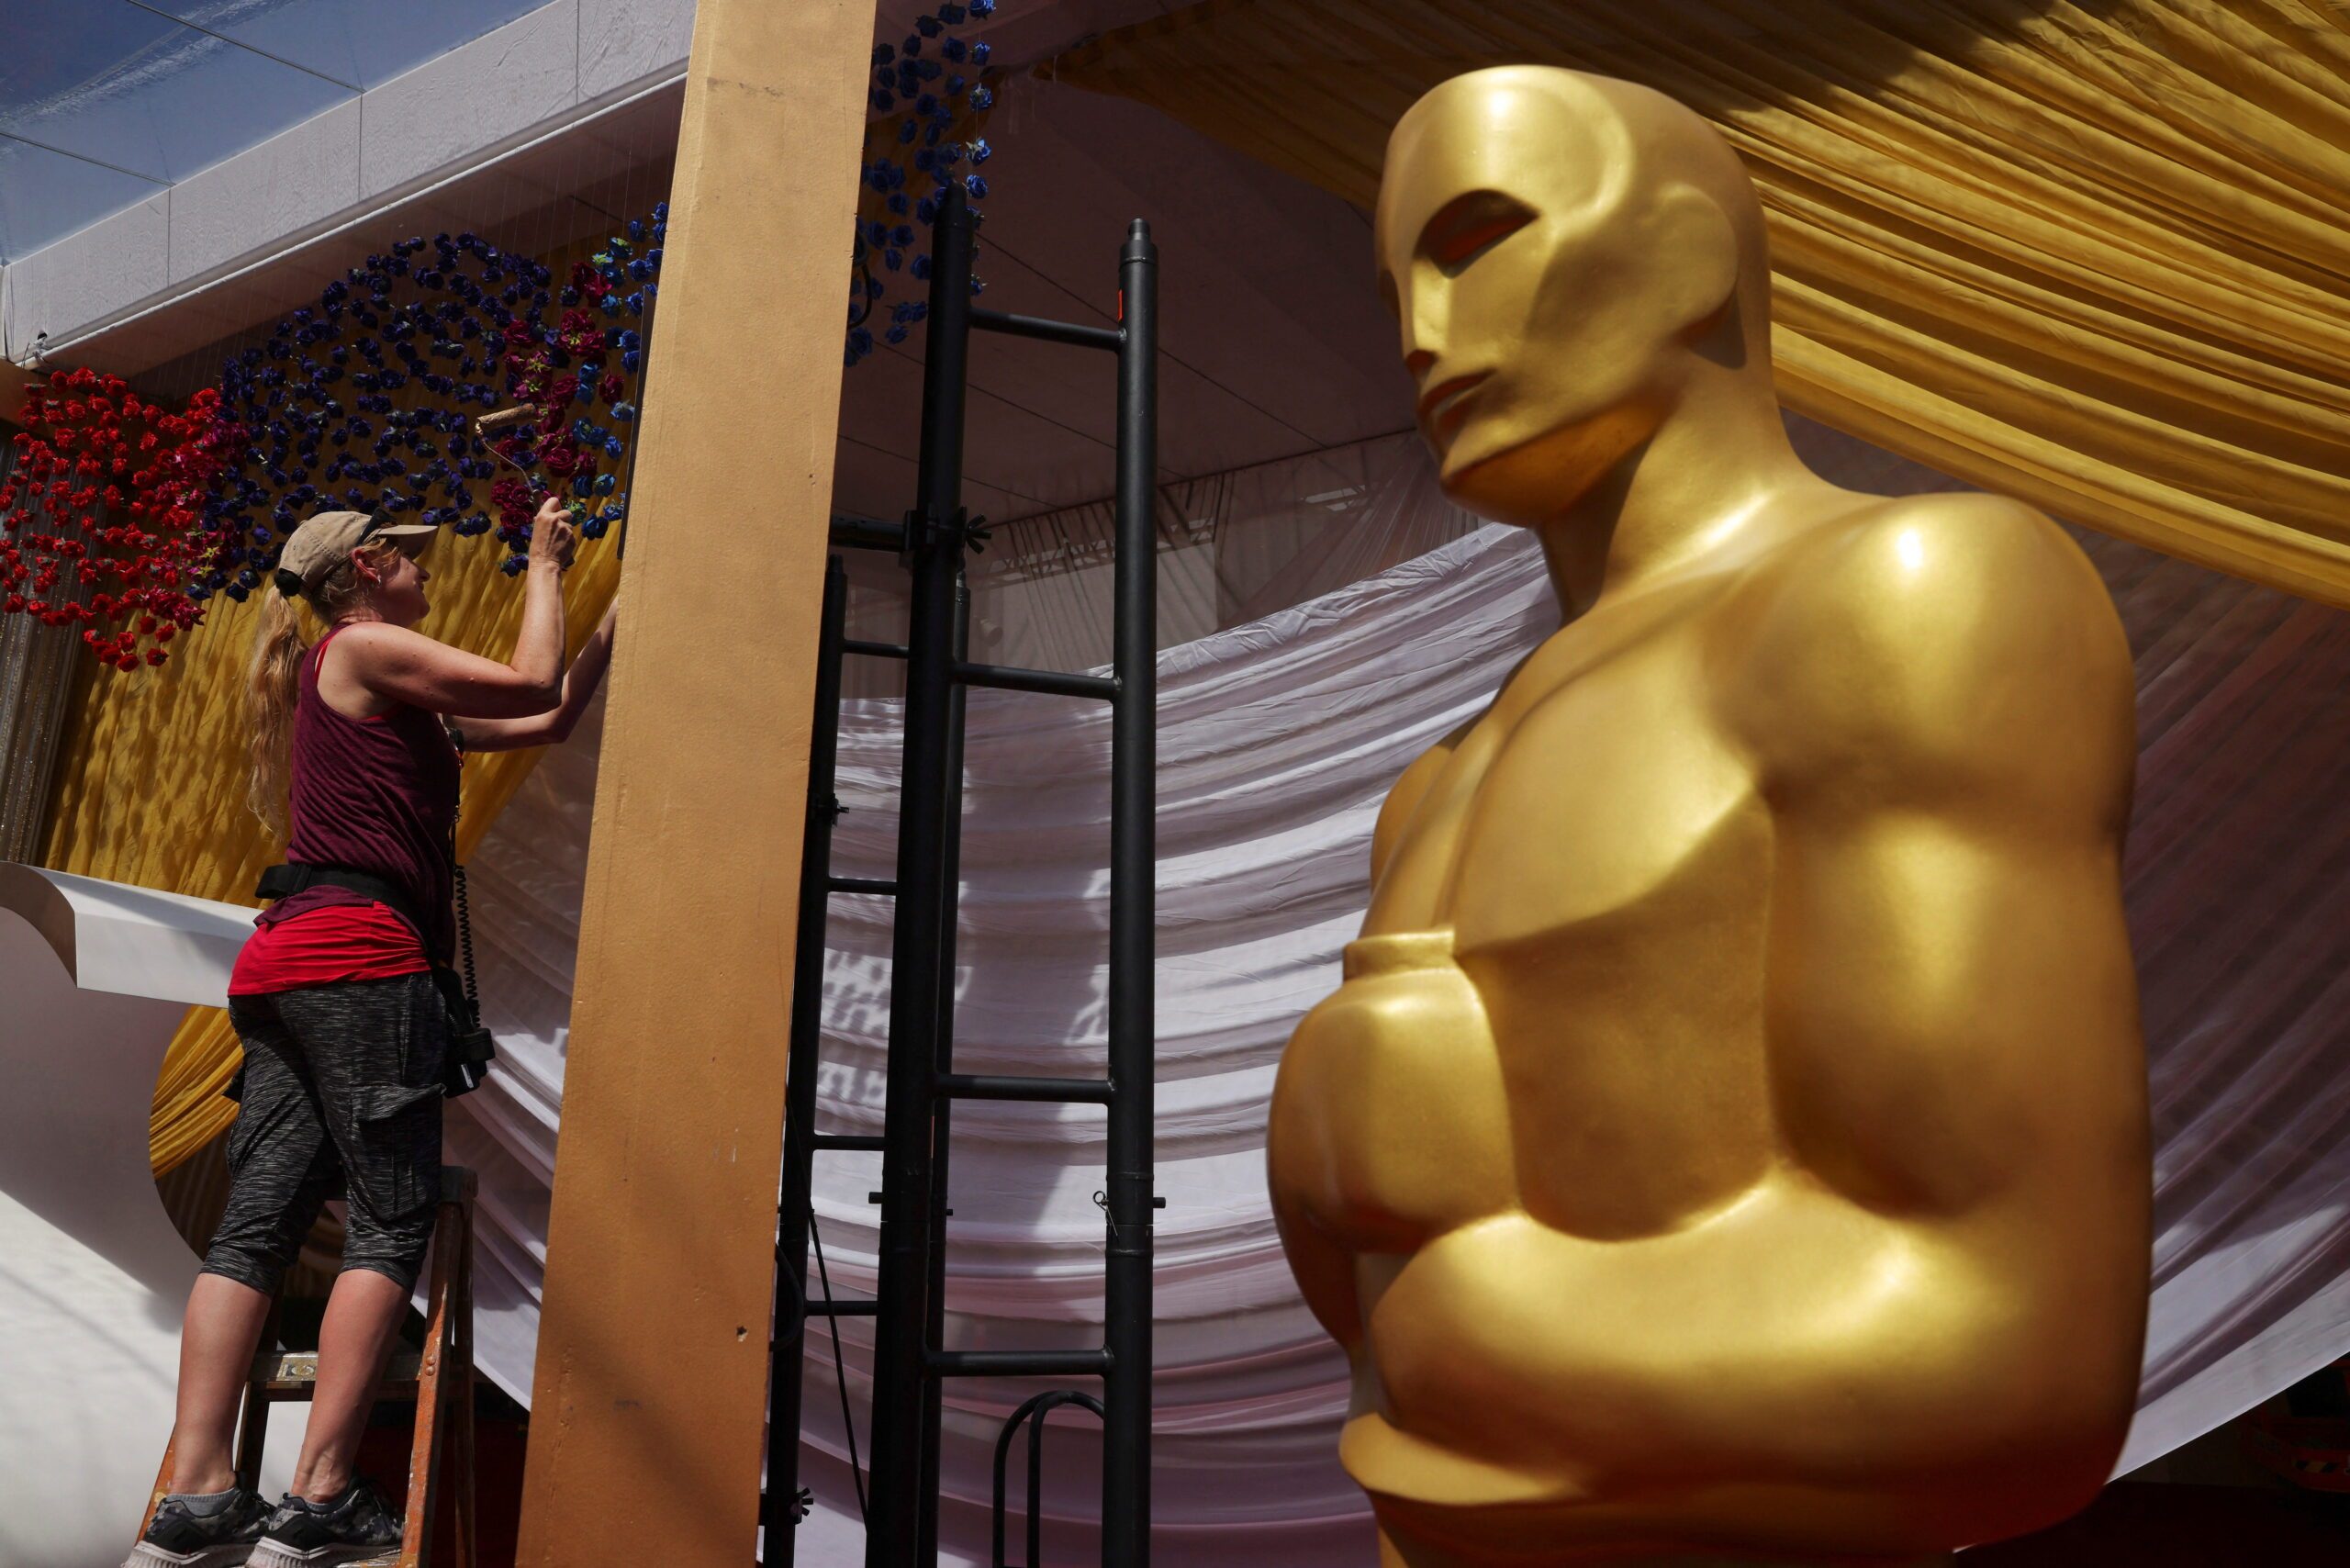 5 things to watch at 2022’s Academy Awards ceremony